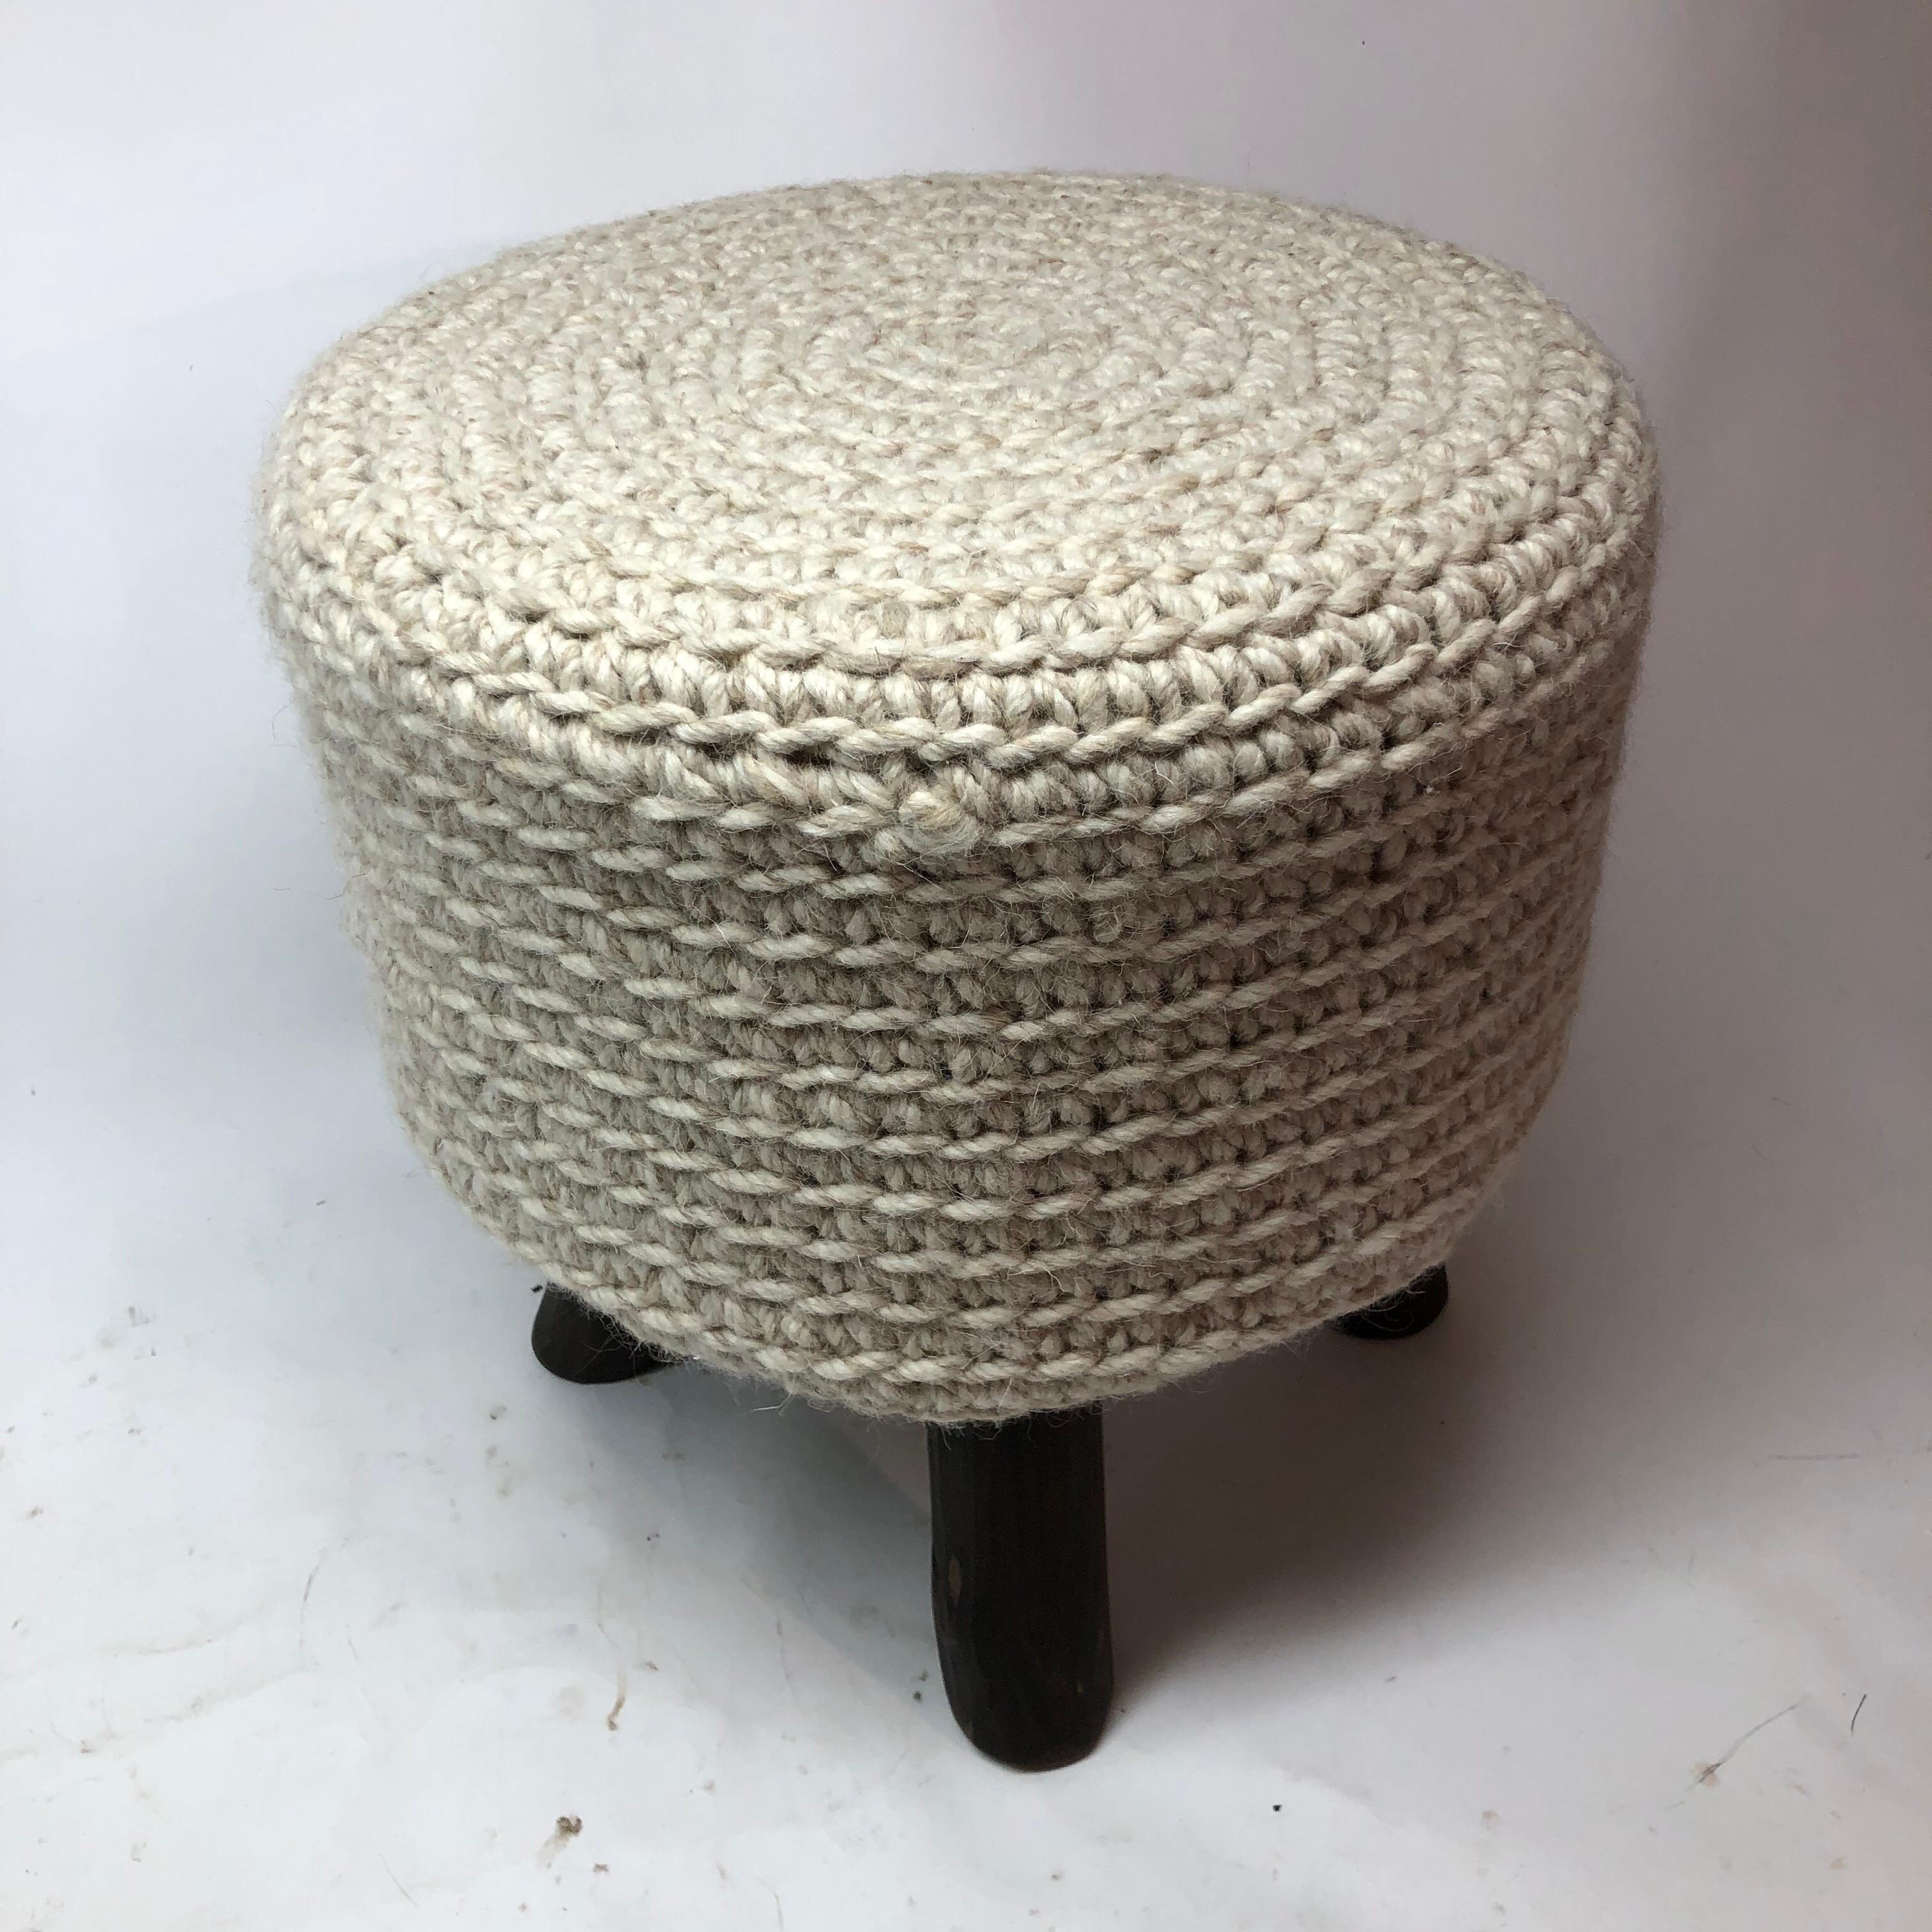 Knitted crochet wool stool with wood legs.